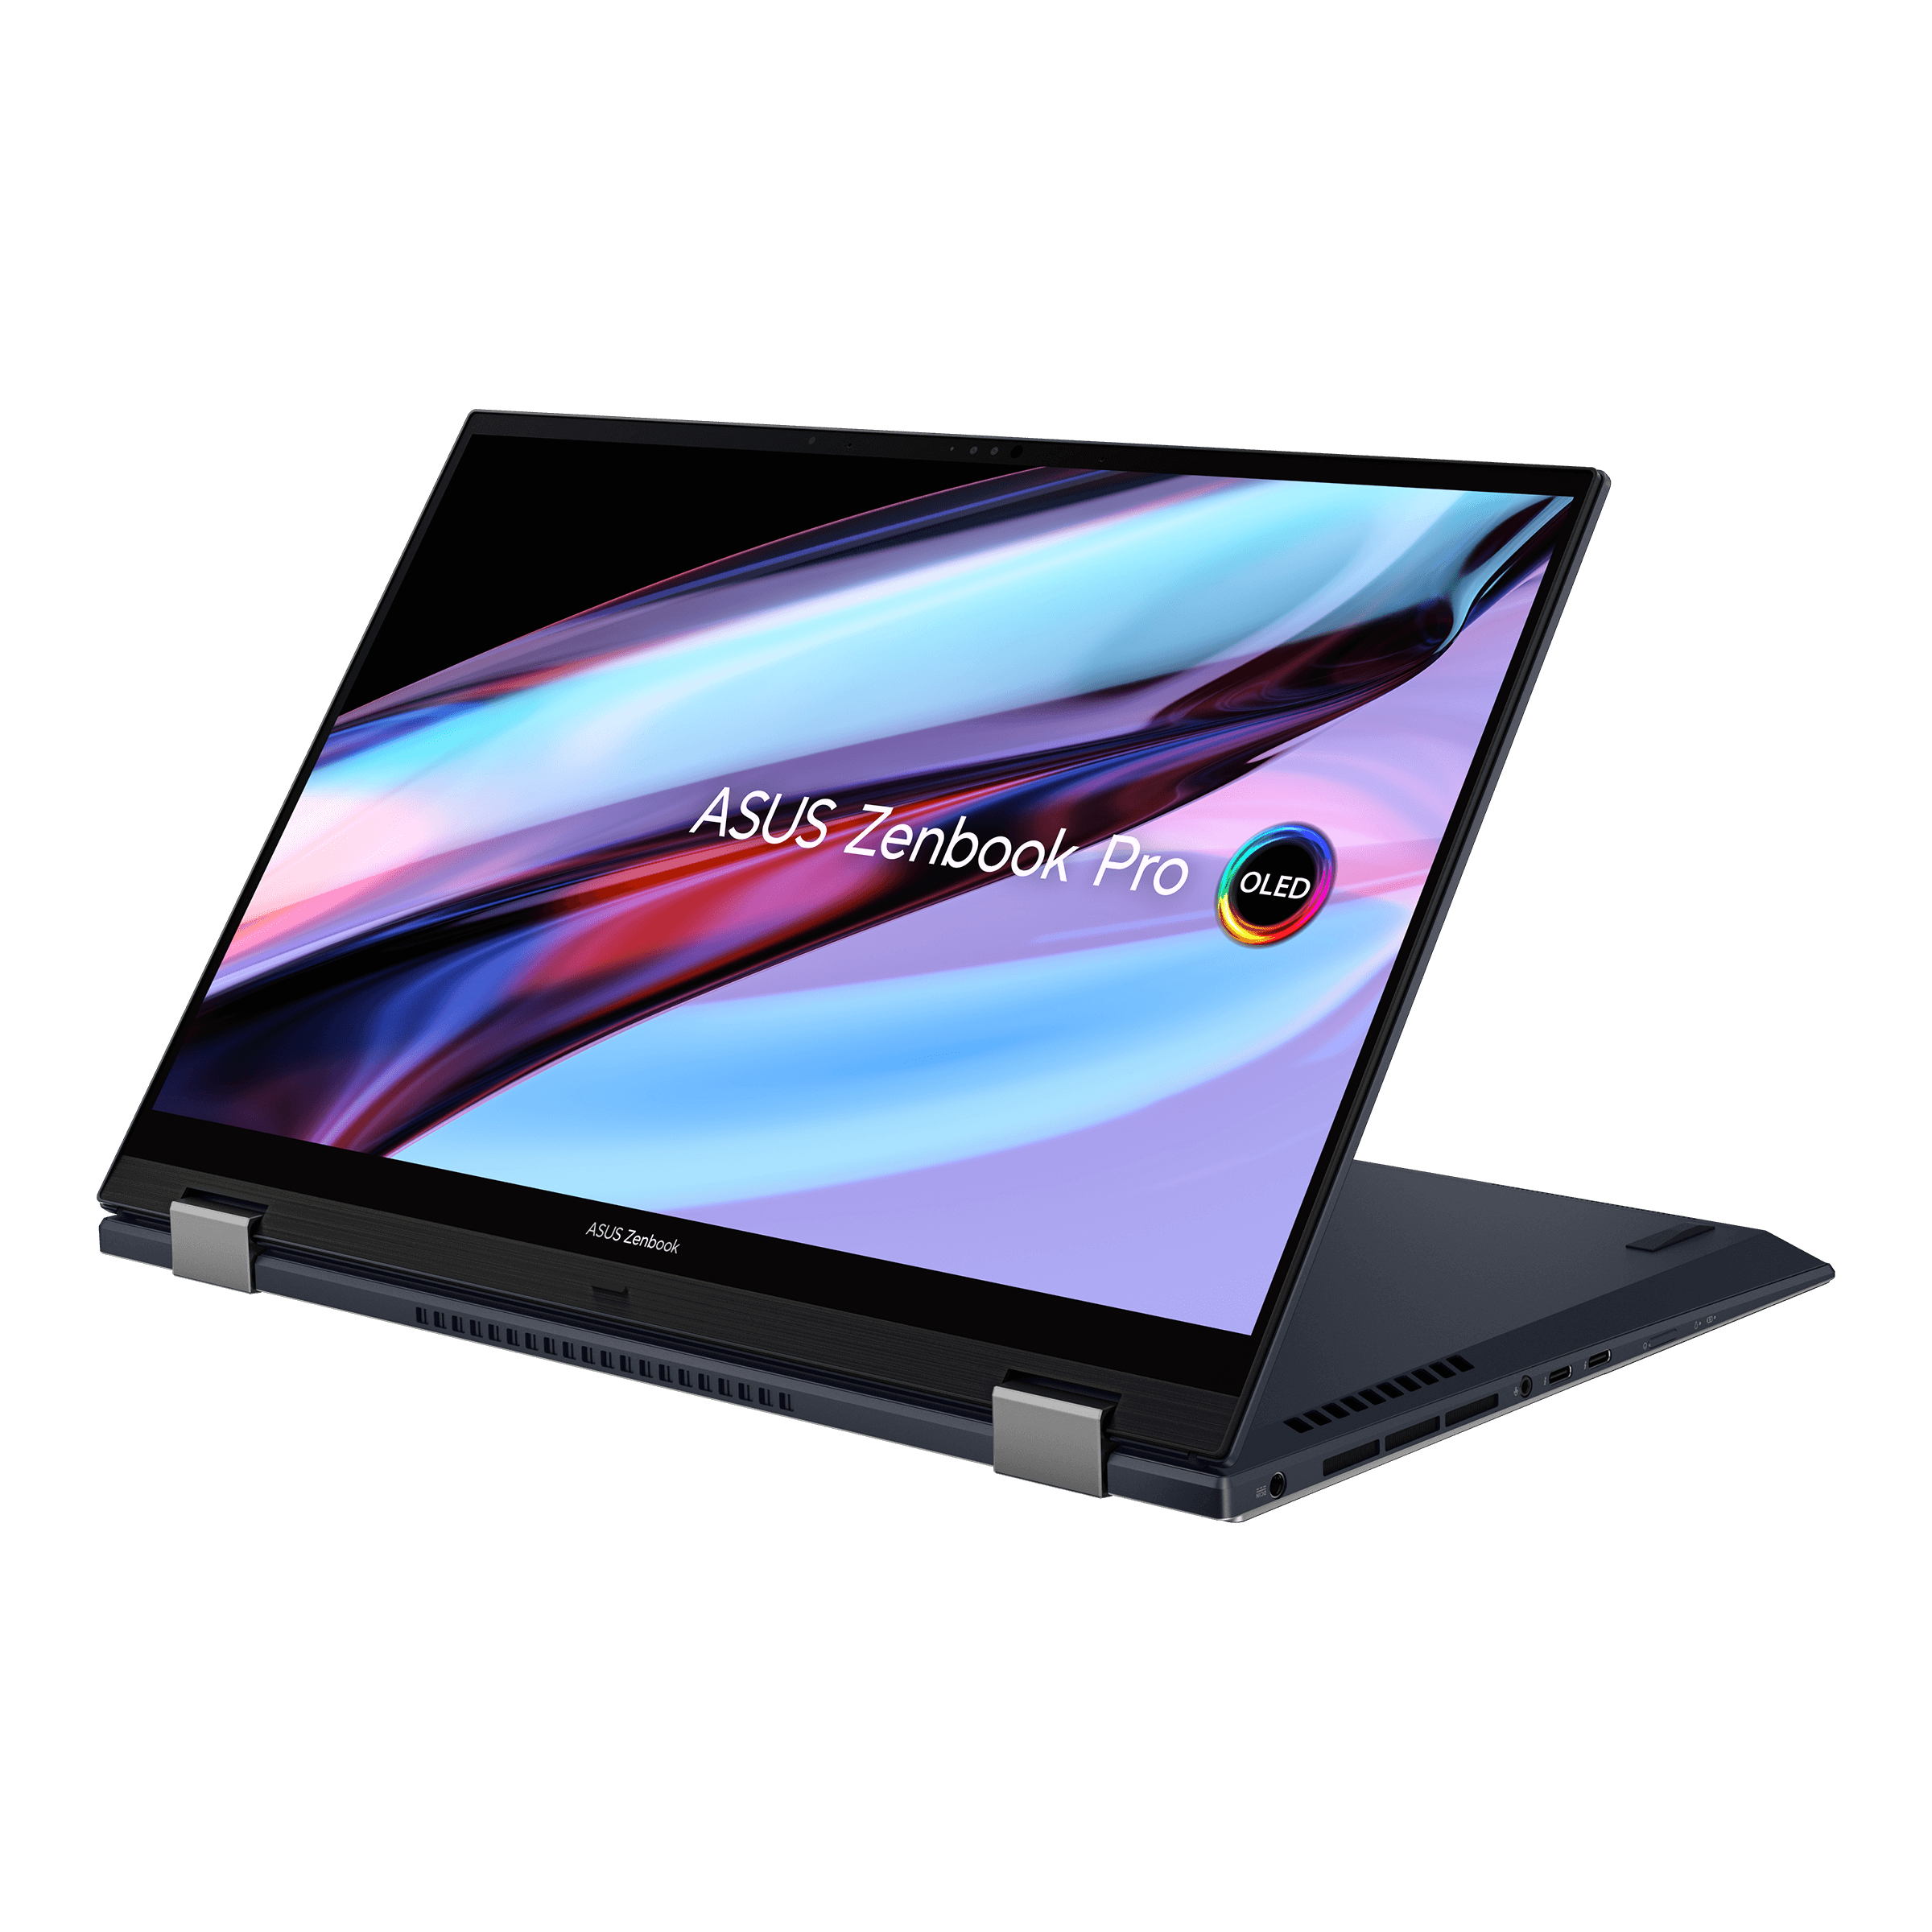 The Zenbook Pro 15 OLED in tablet mode on a white background. The screen displays a multicolor desktop with the Asus Zenbook Pro OLED logo.